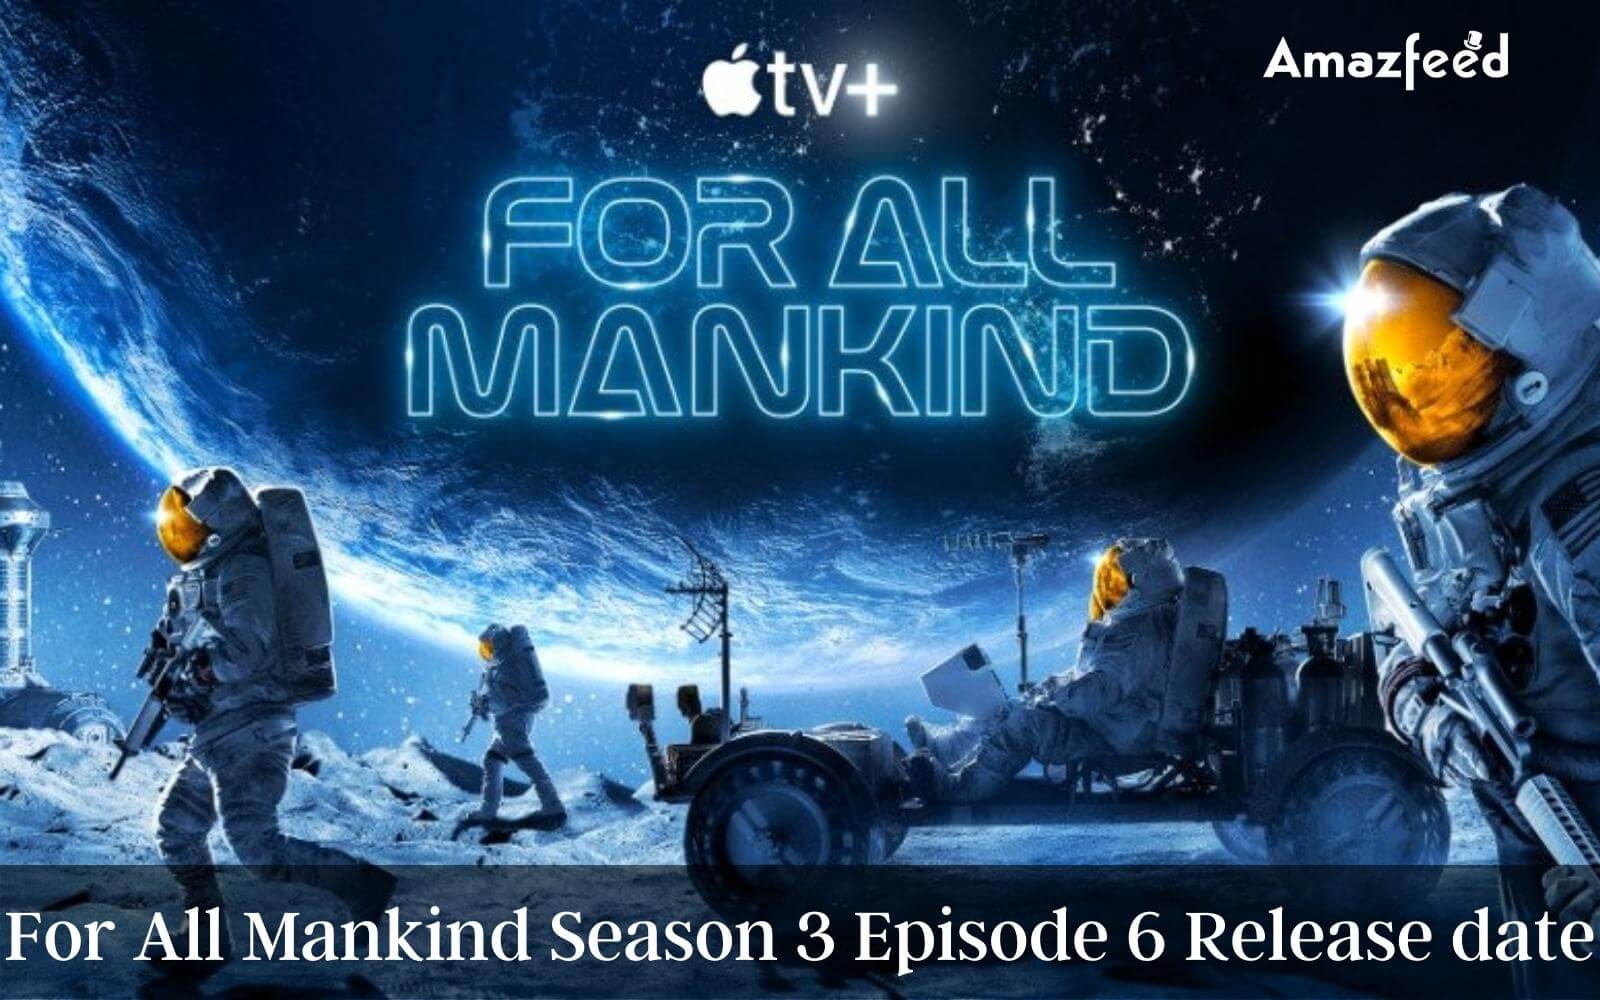 For All Mankind Season 3 Episode 6 ⇒ Countdown, Release Date, Spoilers, Recap, Cast & News Updates